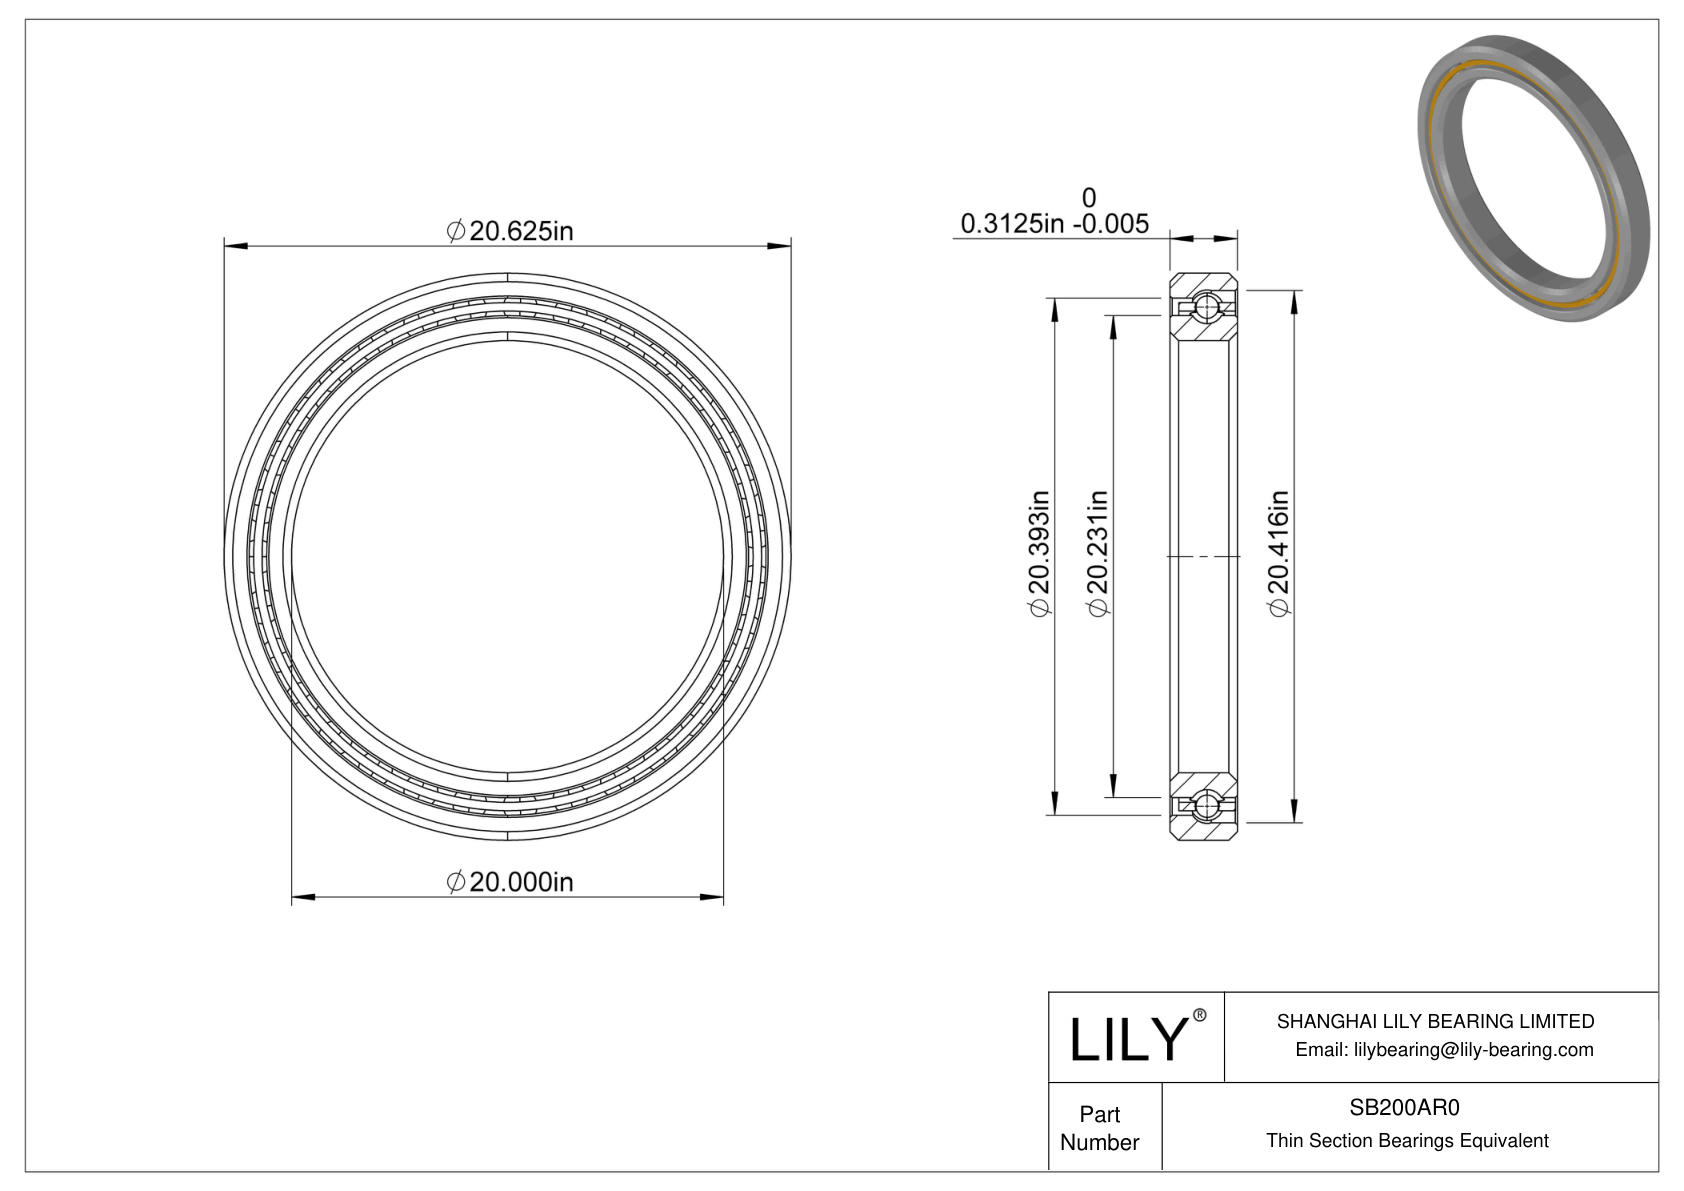 SB200AR0 Constant Section (CS) Bearings cad drawing